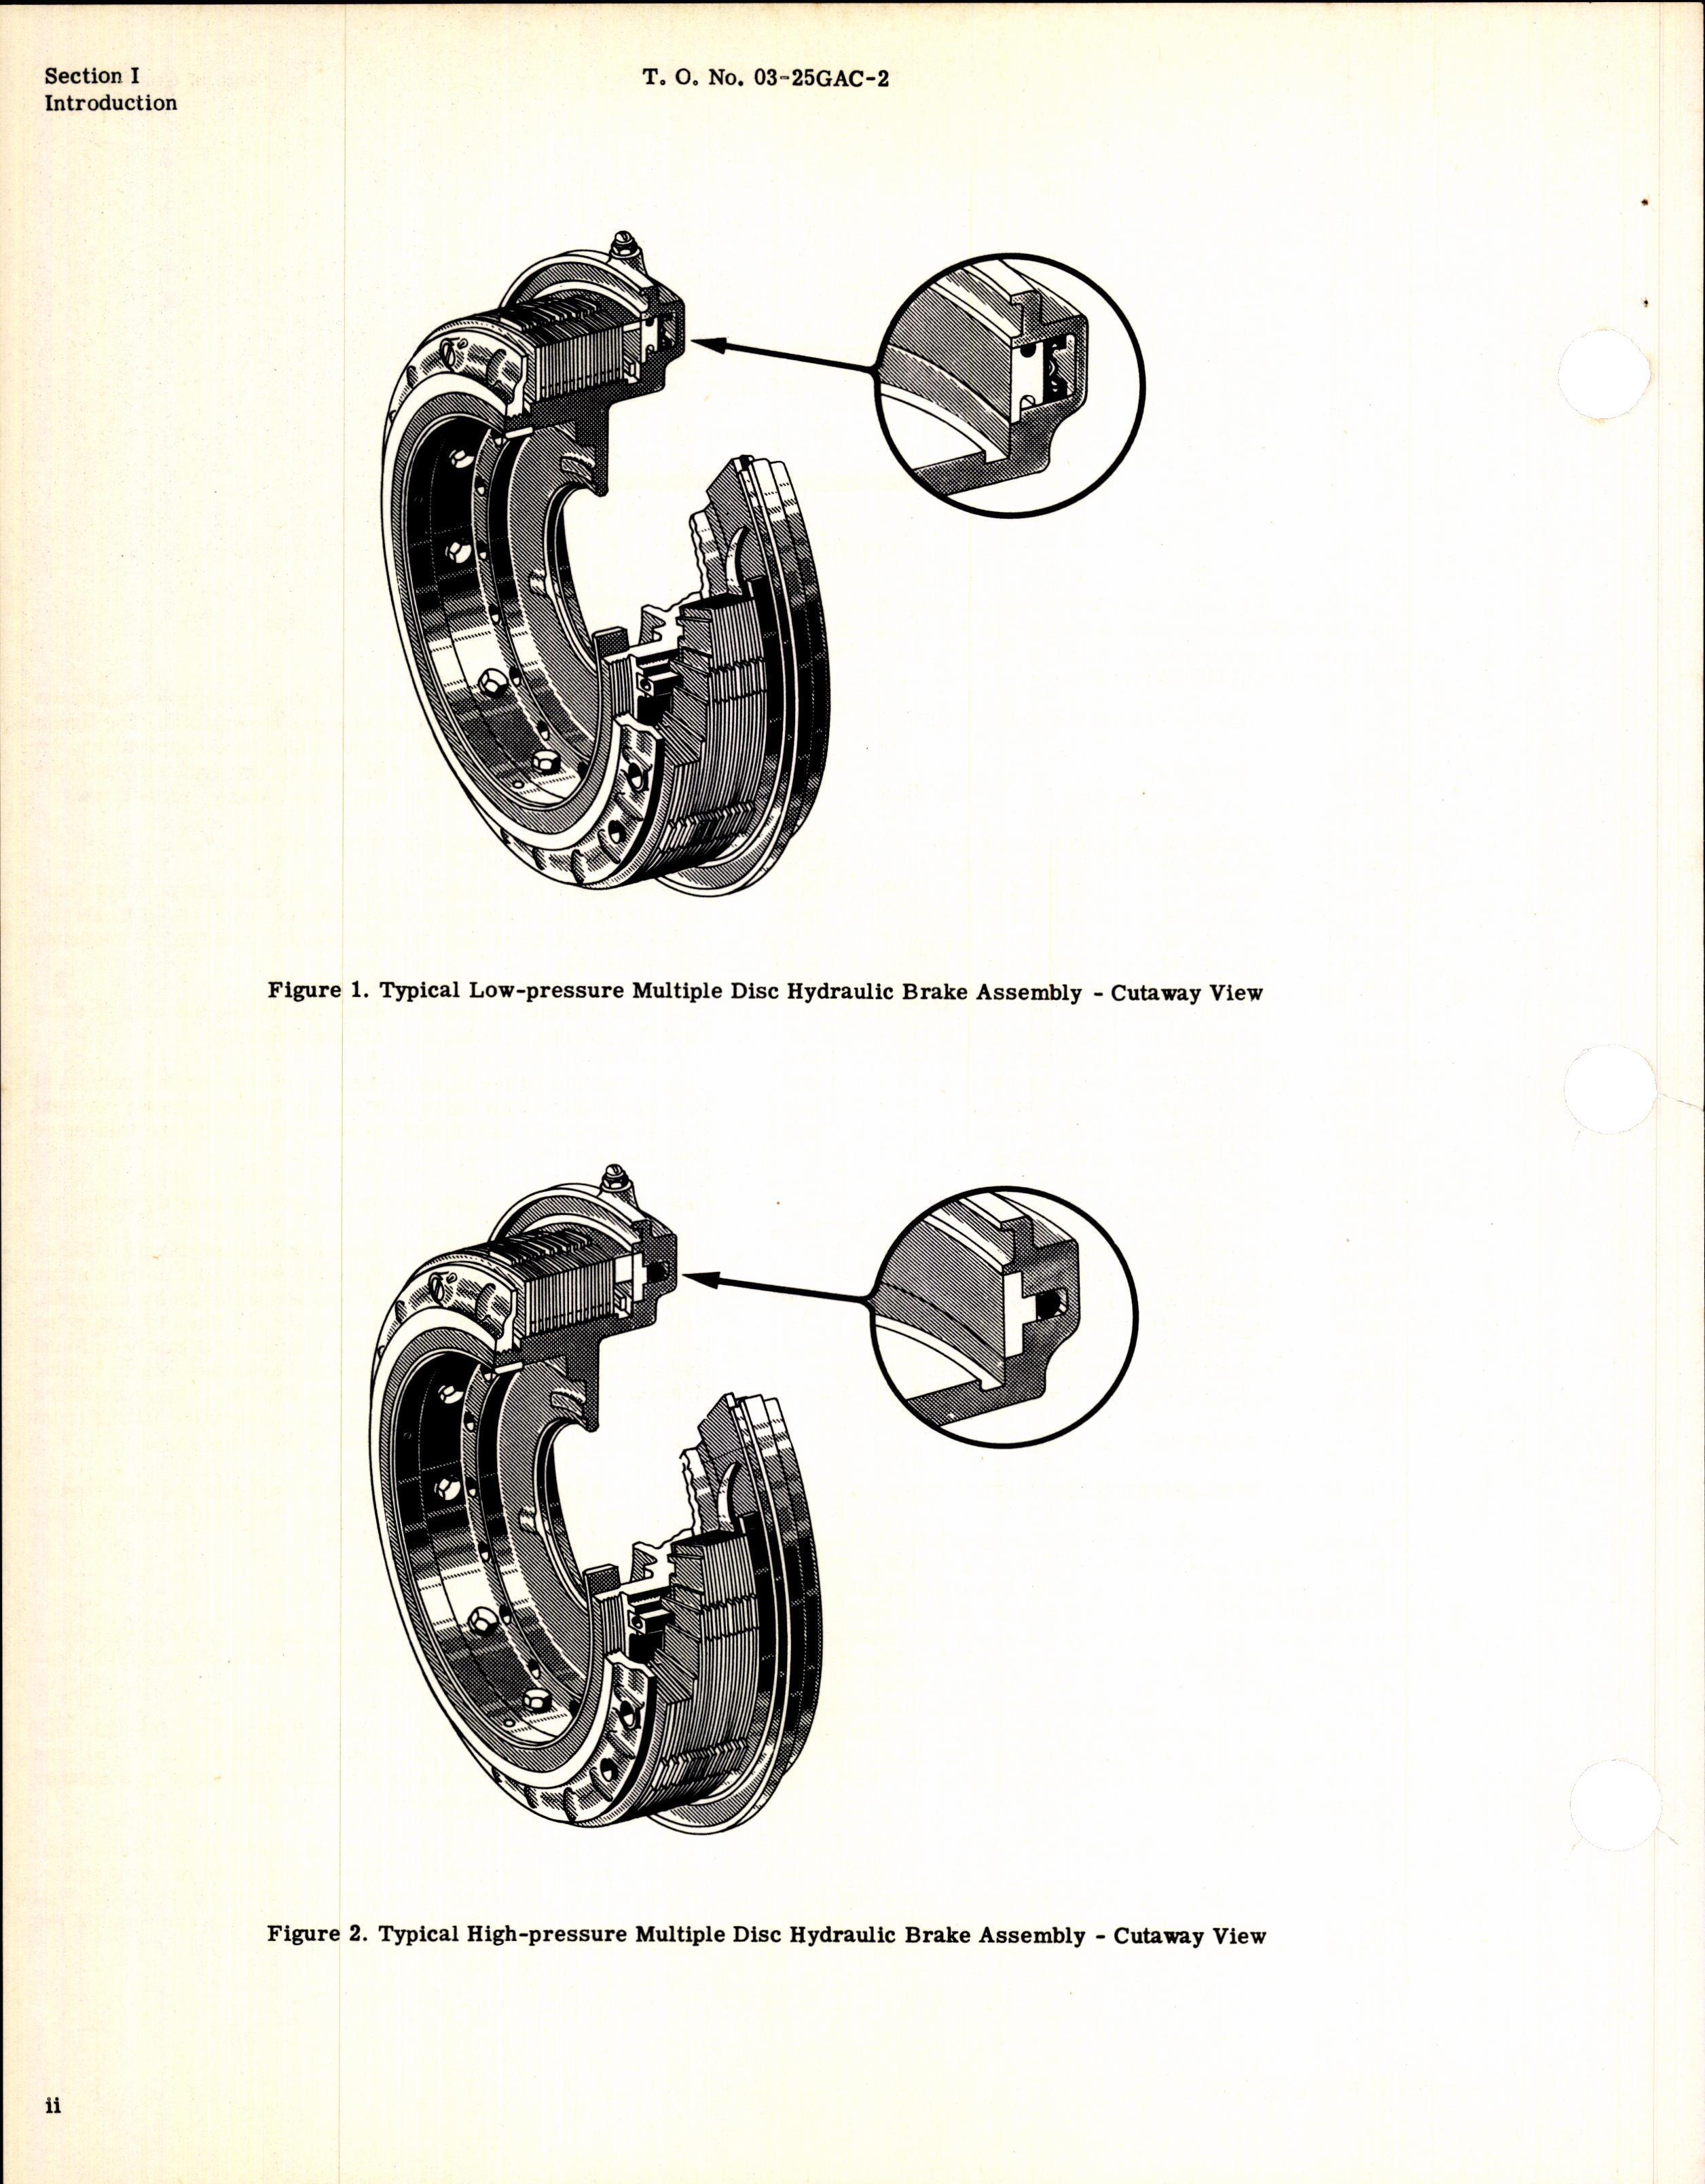 Sample page 4 from AirCorps Library document: Parts Catalog  for Multiple Disk Brakes (Goodyear)